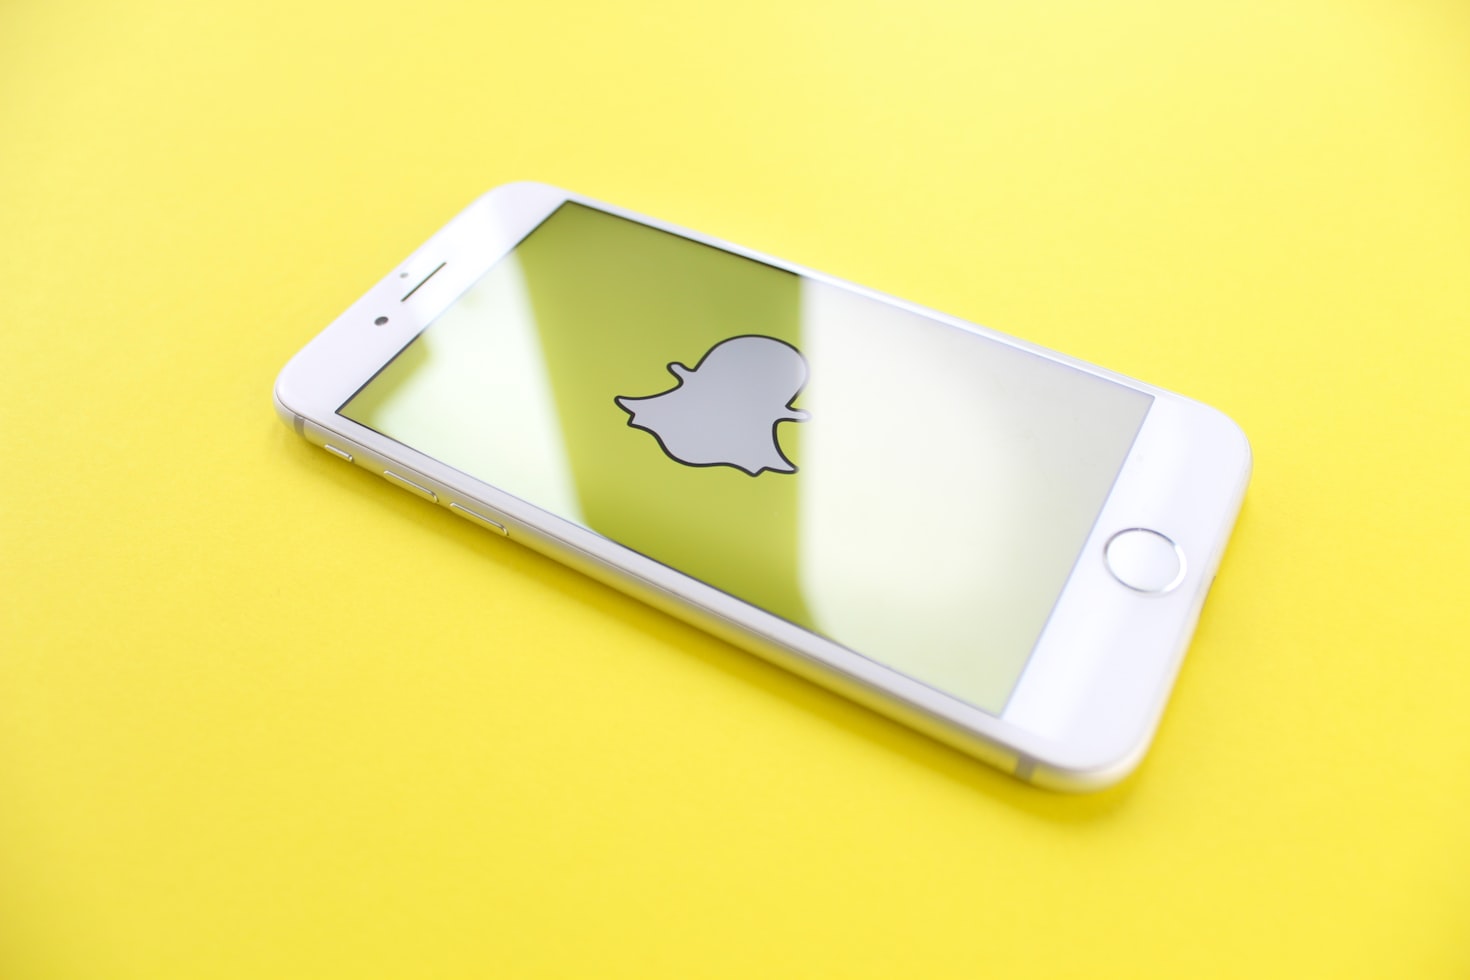 Snapchat Advertising in 2022: How to Run Effective Snapchat Ads